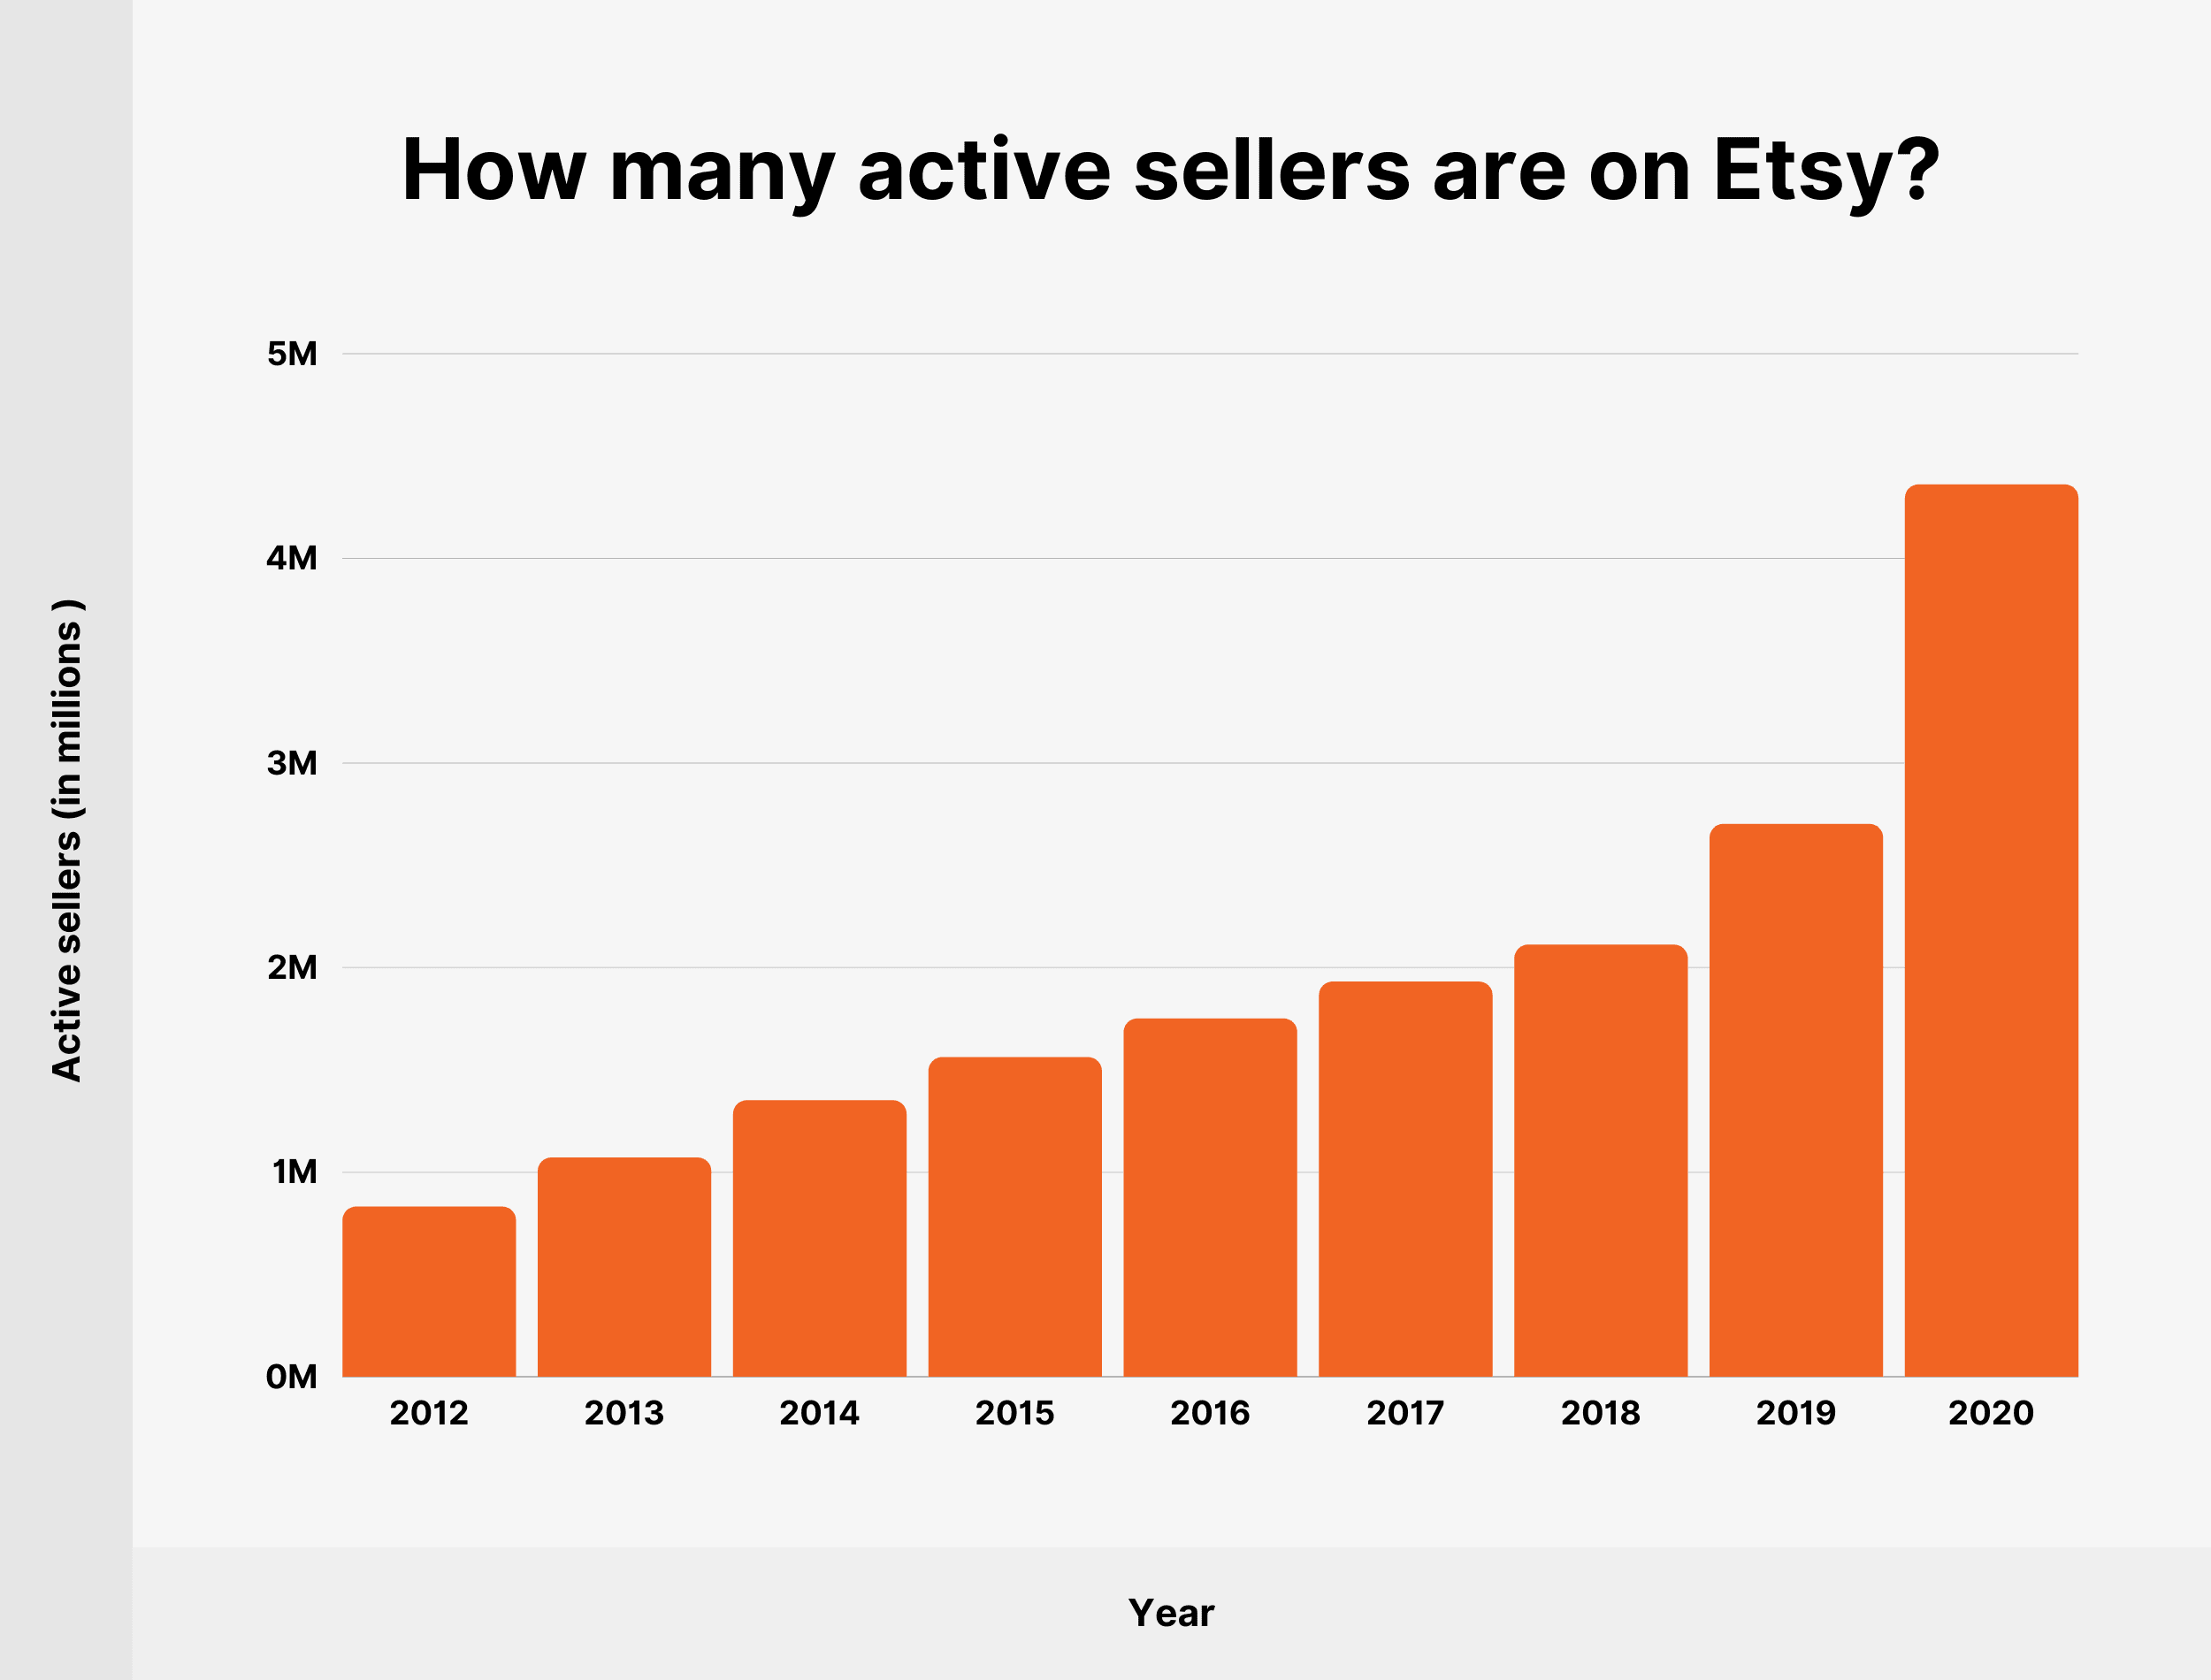 How many active sellers are on Etsy?